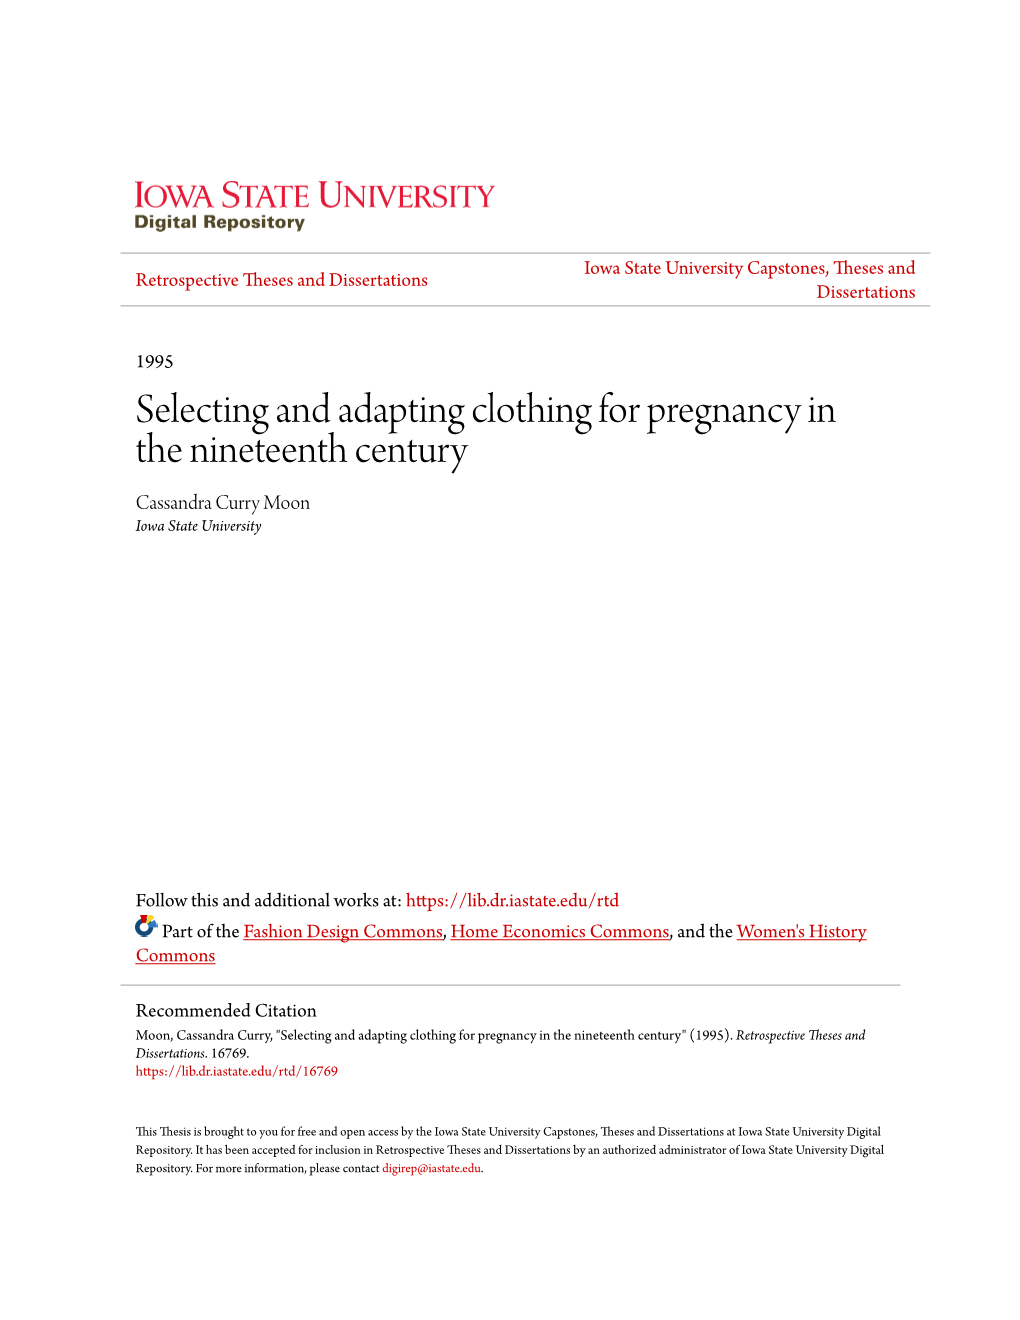 Selecting and Adapting Clothing for Pregnancy in the Nineteenth Century Cassandra Curry Moon Iowa State University